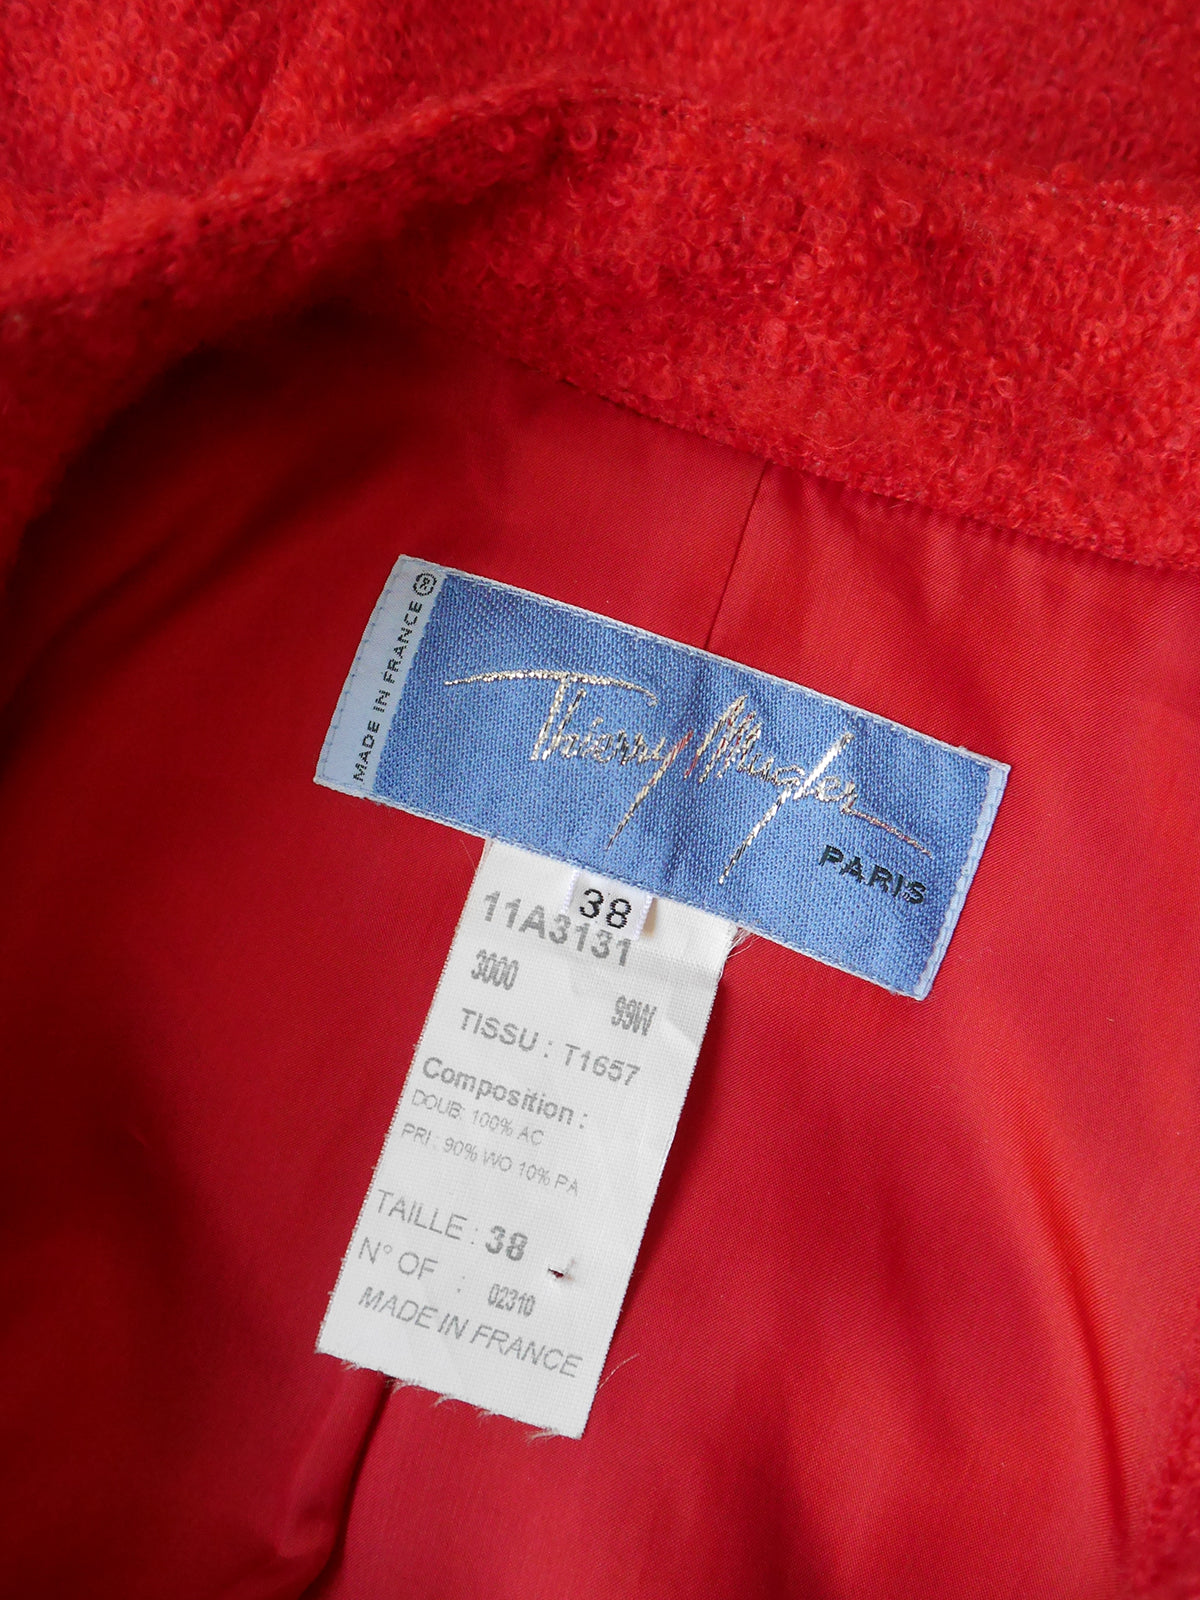 THIERRY MUGLER Vintage Red Wool Bouclé Jacket w/ Silver Buckle